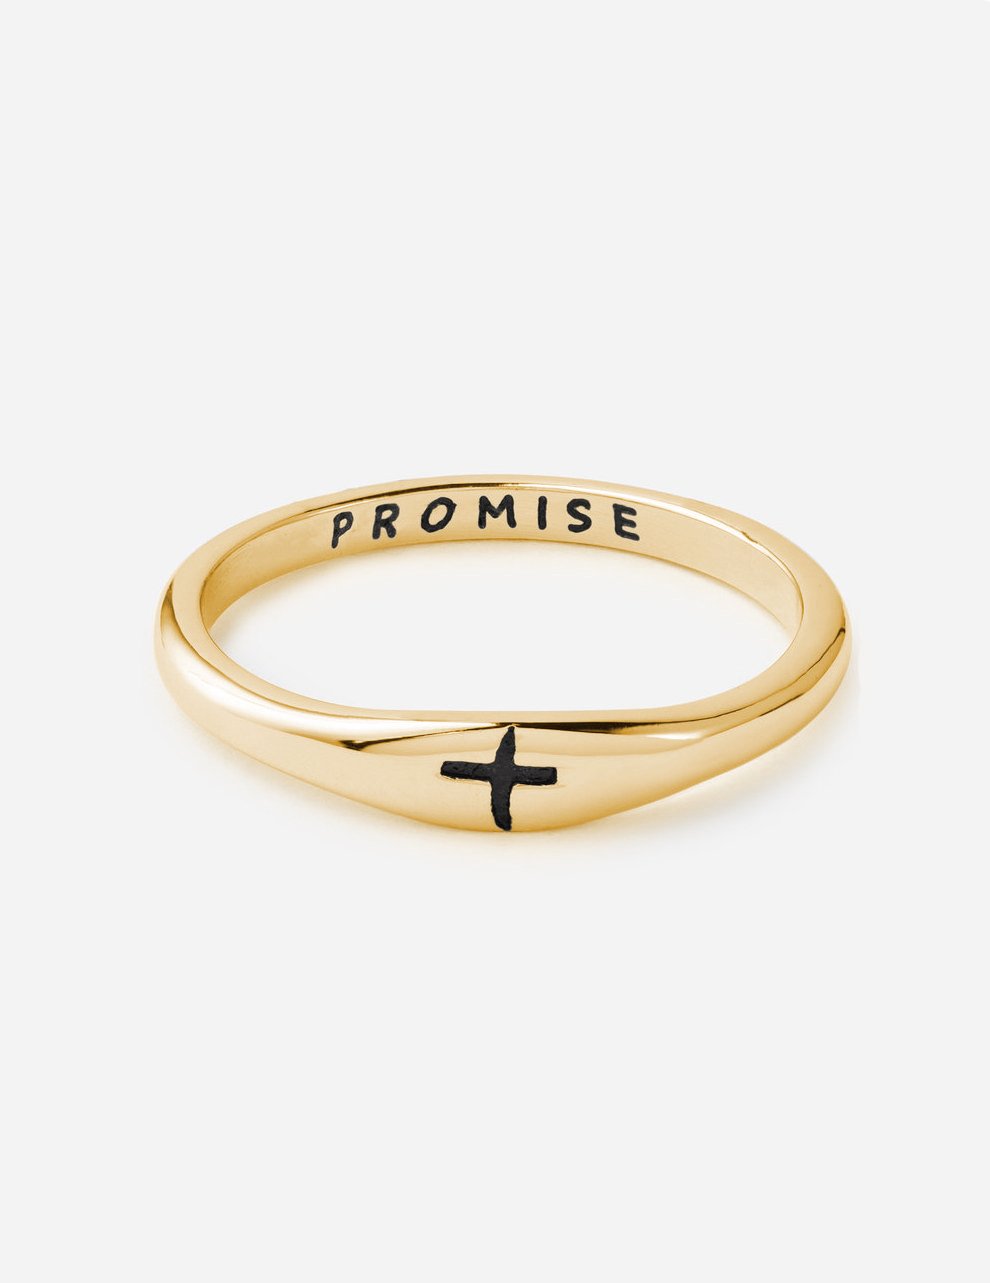 Gold Promise Ring, Purity Rings, Christian Rings